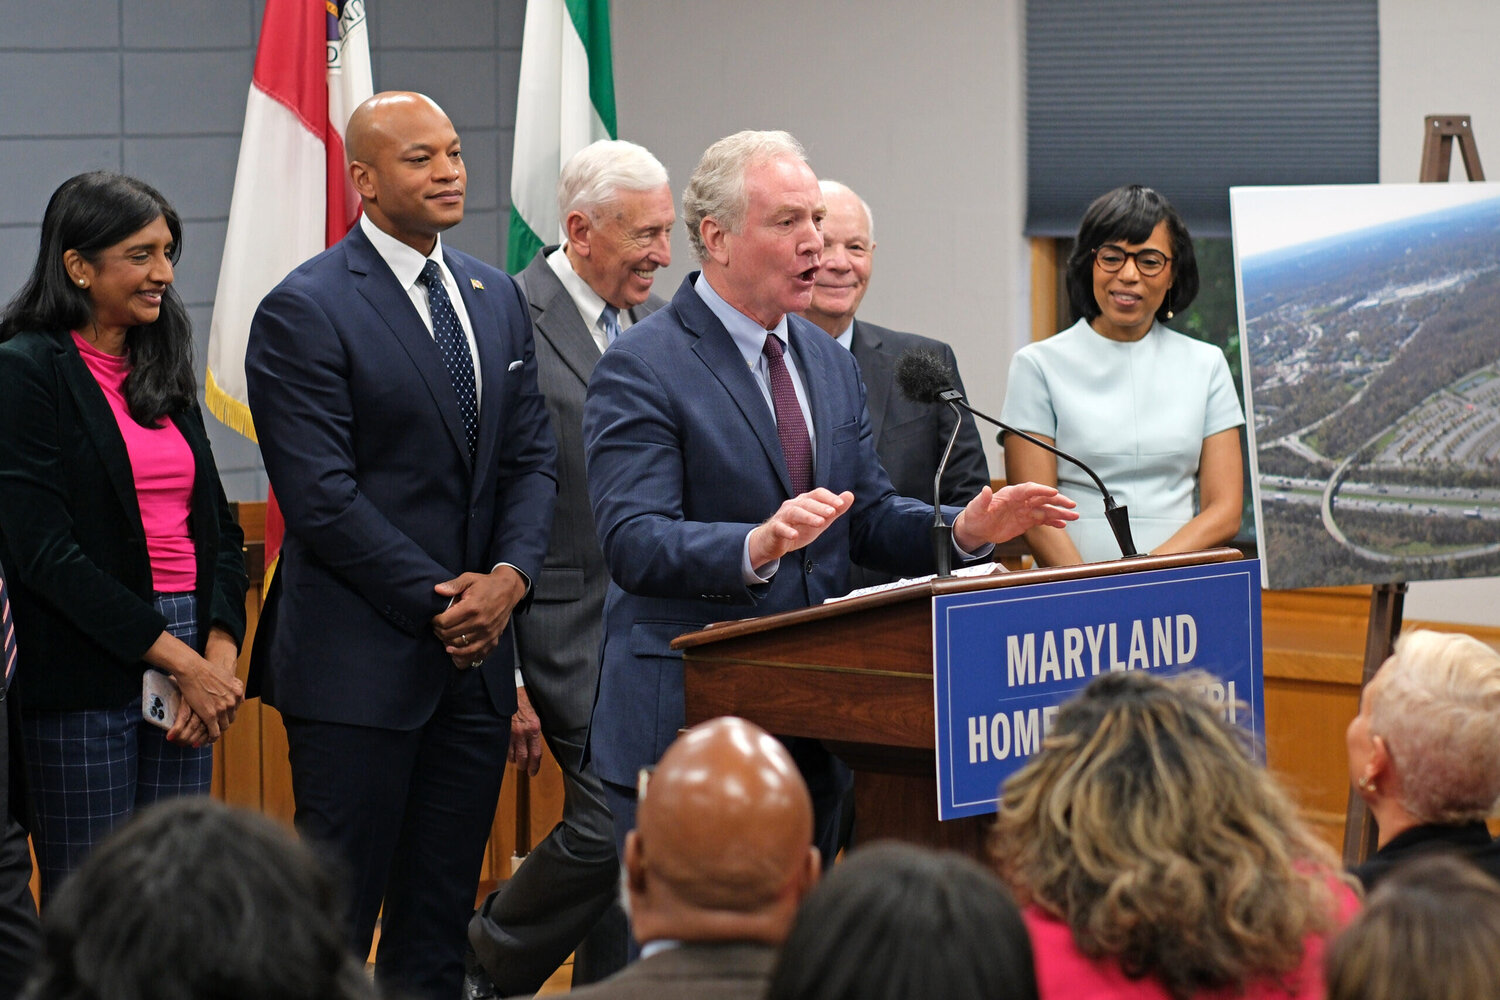 U.S. Sen. Chris Van Hollen defends the federal government's choice of Greenbelt, Maryland, for a new FBI headquarters Friday. He's joined by Maryland leaders, from left, Lt. Gov. Aruna Miller, Gov. Wes Moore, U.S. Rep. Steny Hoyer, U.S. Sen. Ben Cardin and Prince George's County Executive Angela Alsobrooks.